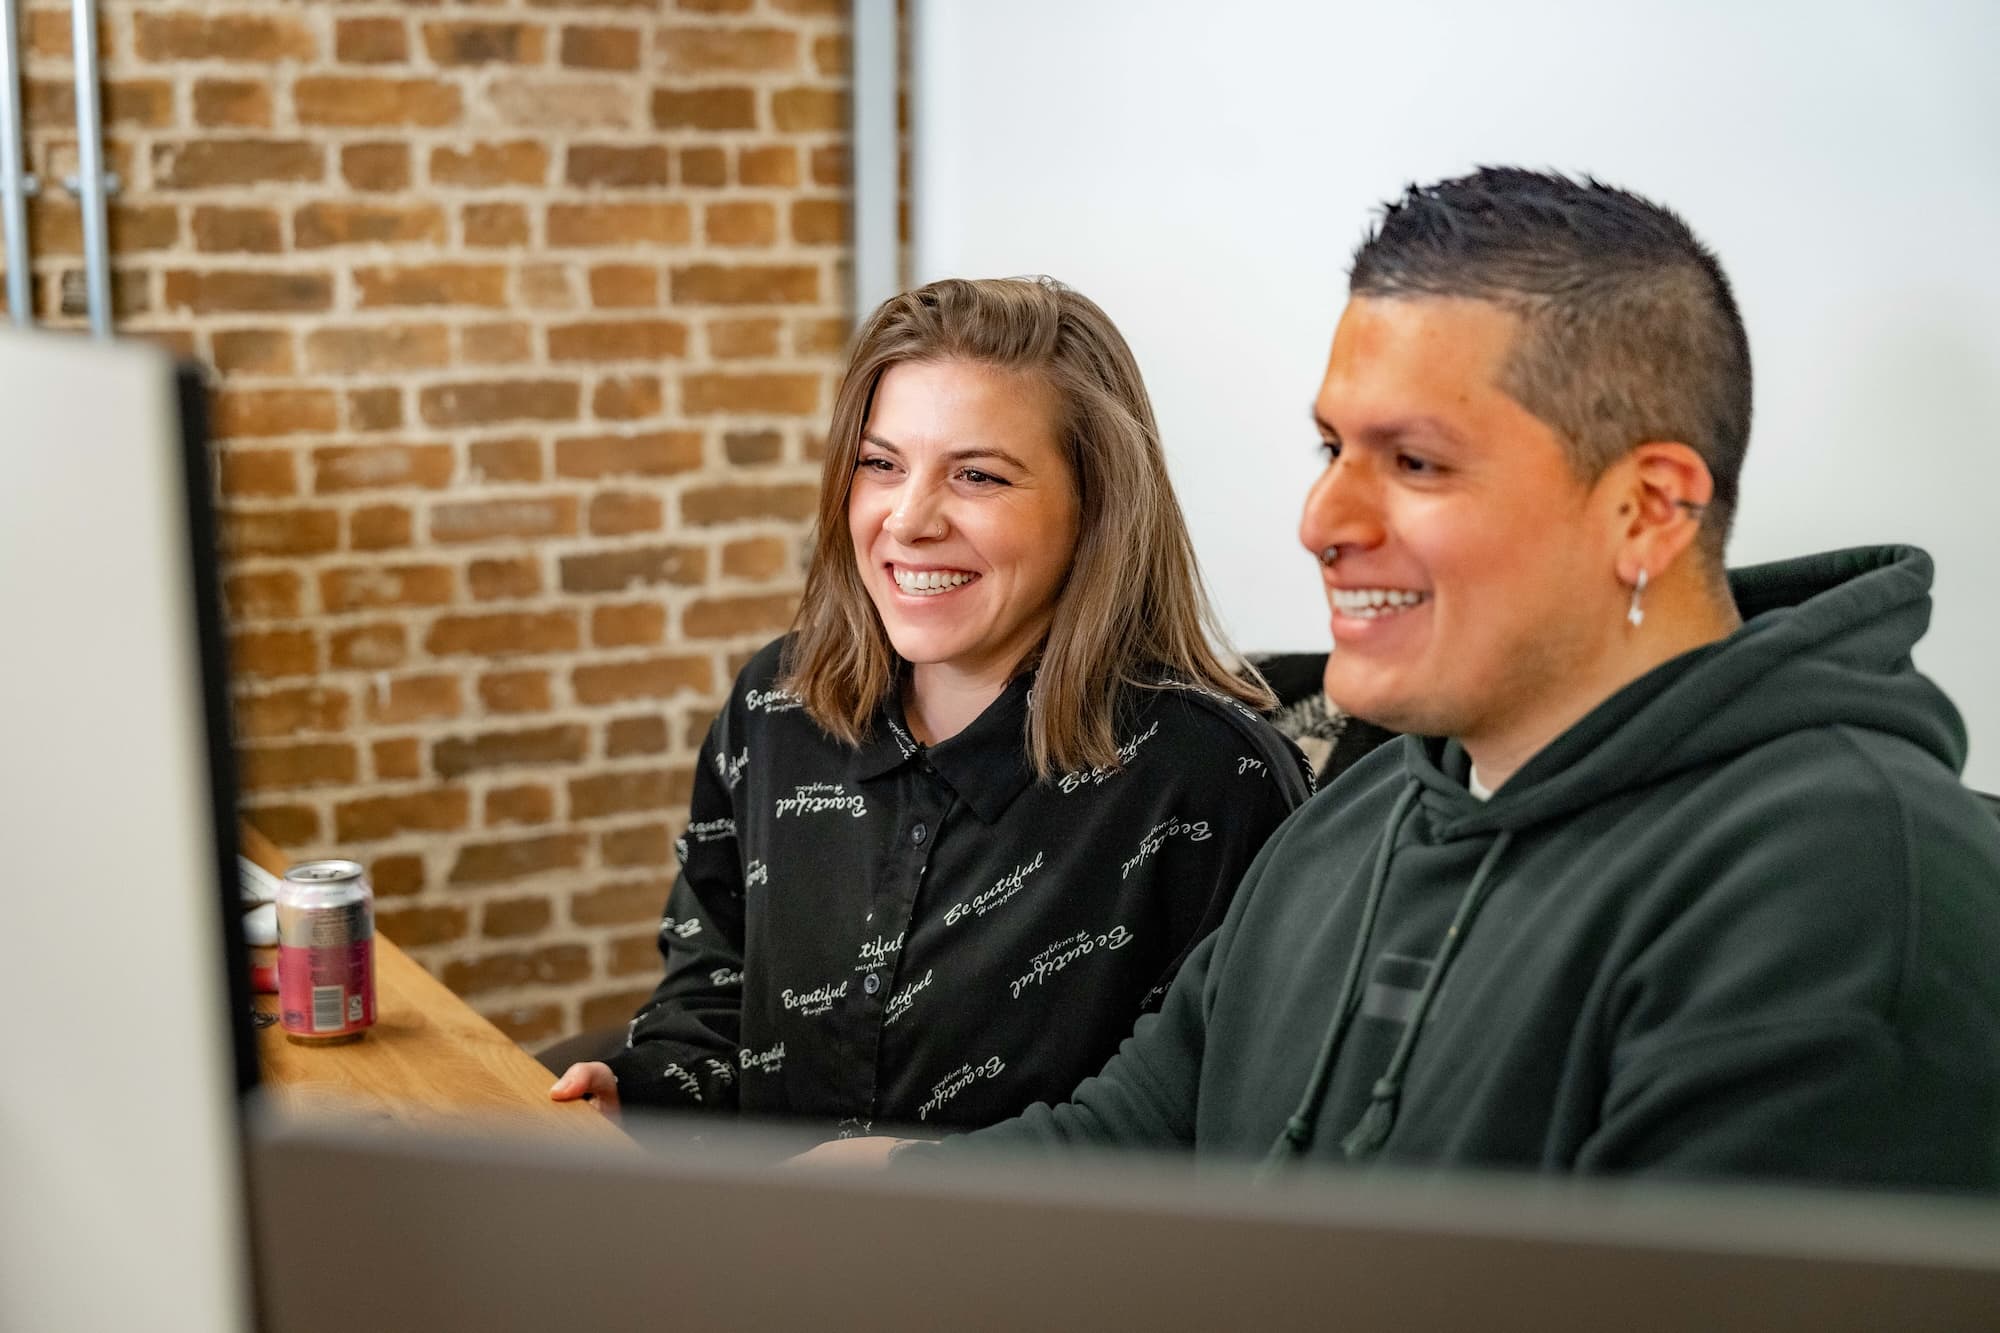 Male and female colleagues smiling happily at desk while working on a big screen together